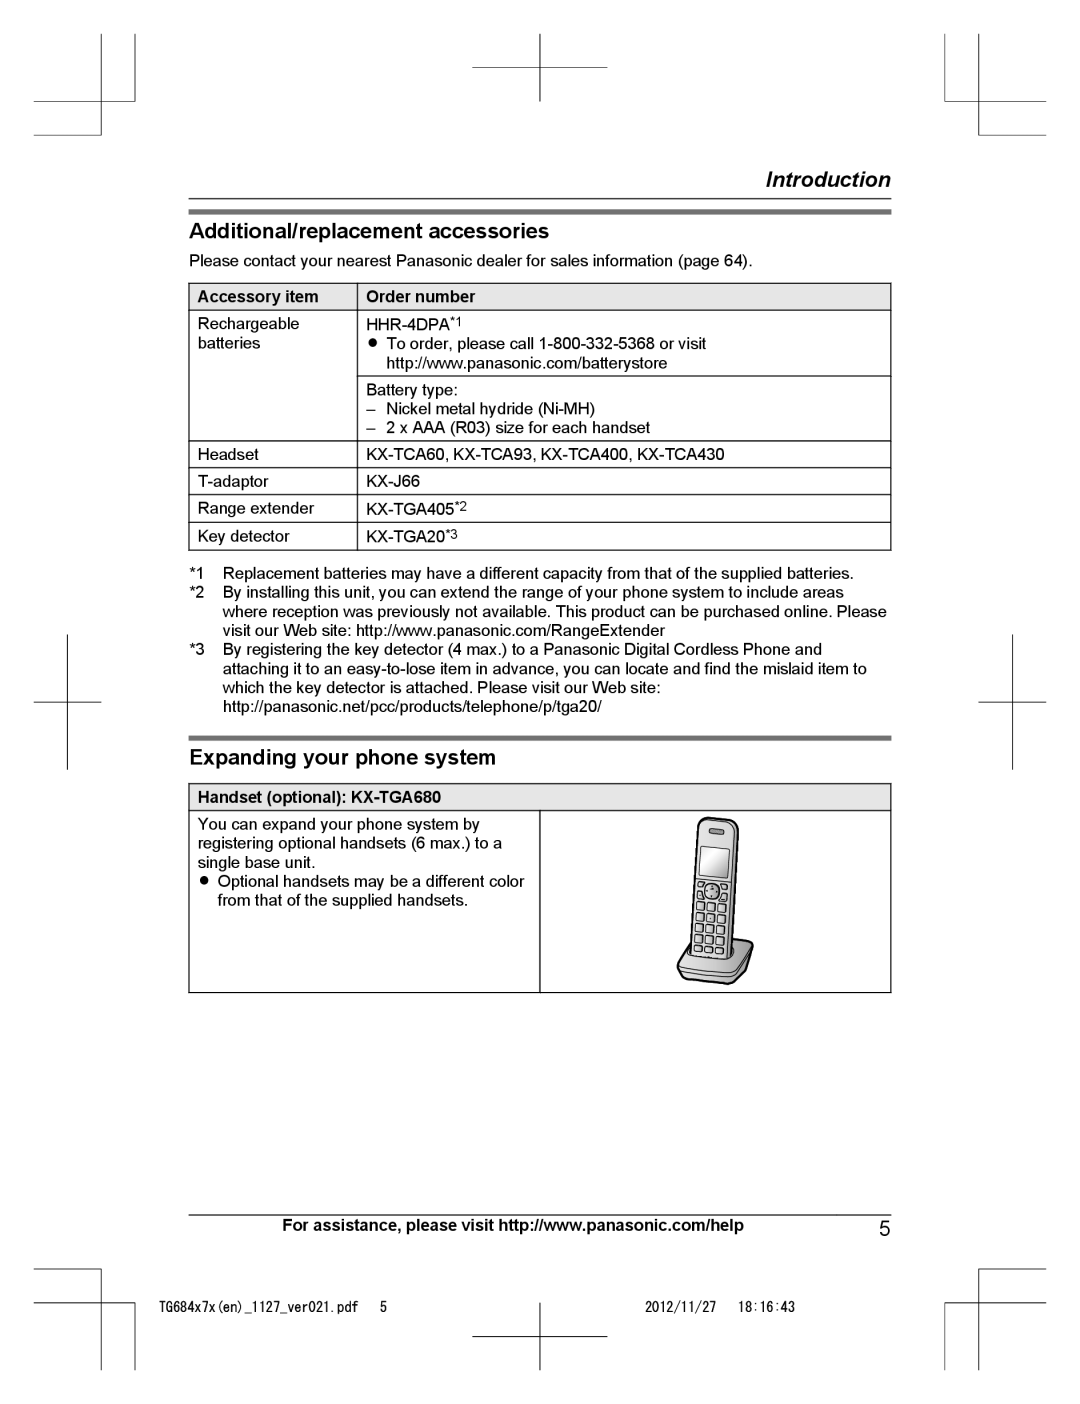 Panasonic KX-TG6843 Additional/replacement accessories, Expanding your phone system, Introduction, Accessory item 